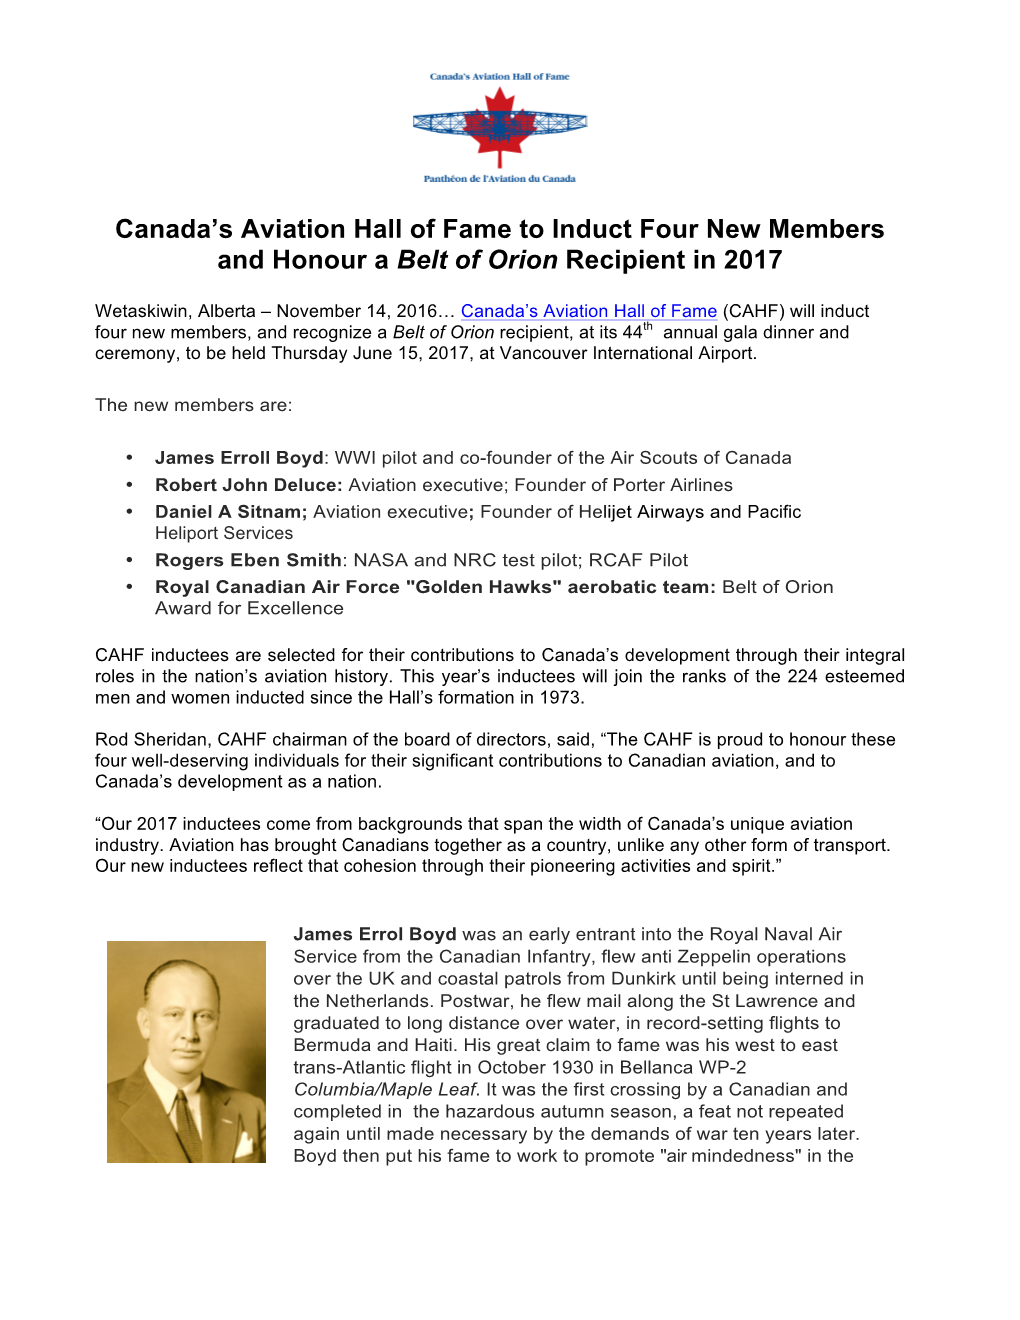 Canada's Aviation Hall of Fame to Induct Four New Members And